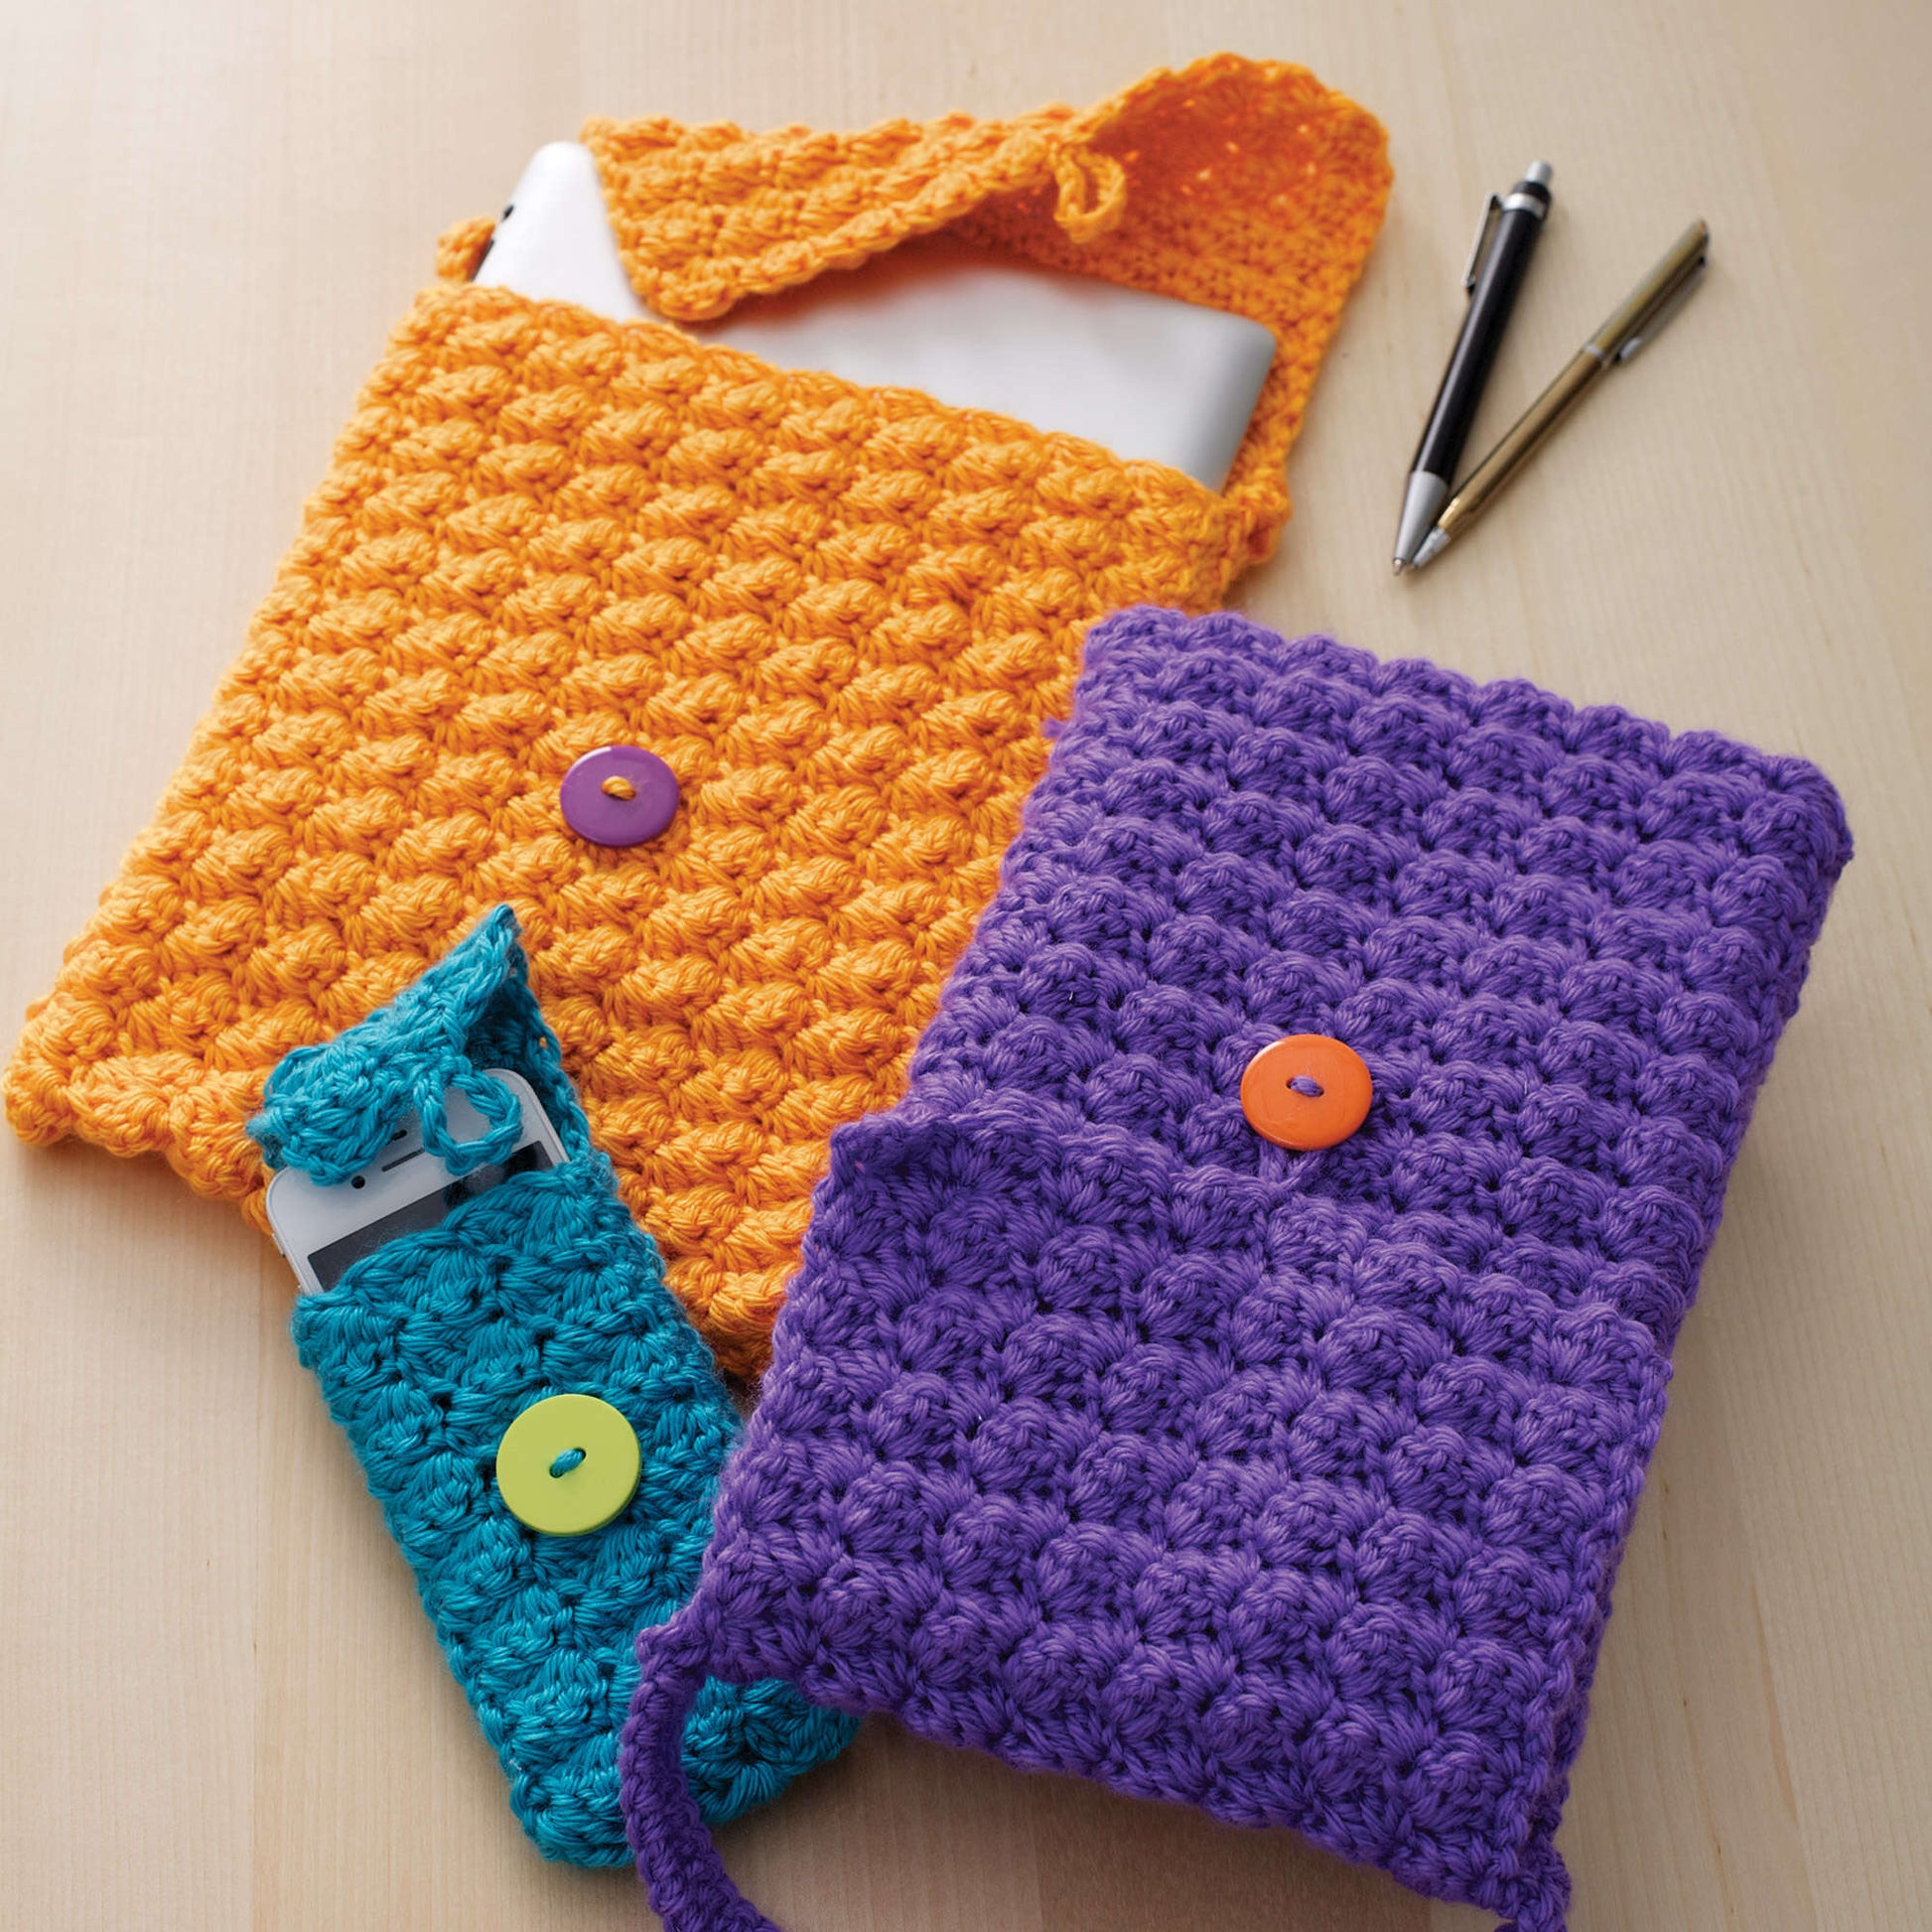 Free Caron Crochet Cell Phone Or Tablet Cozy Pattern